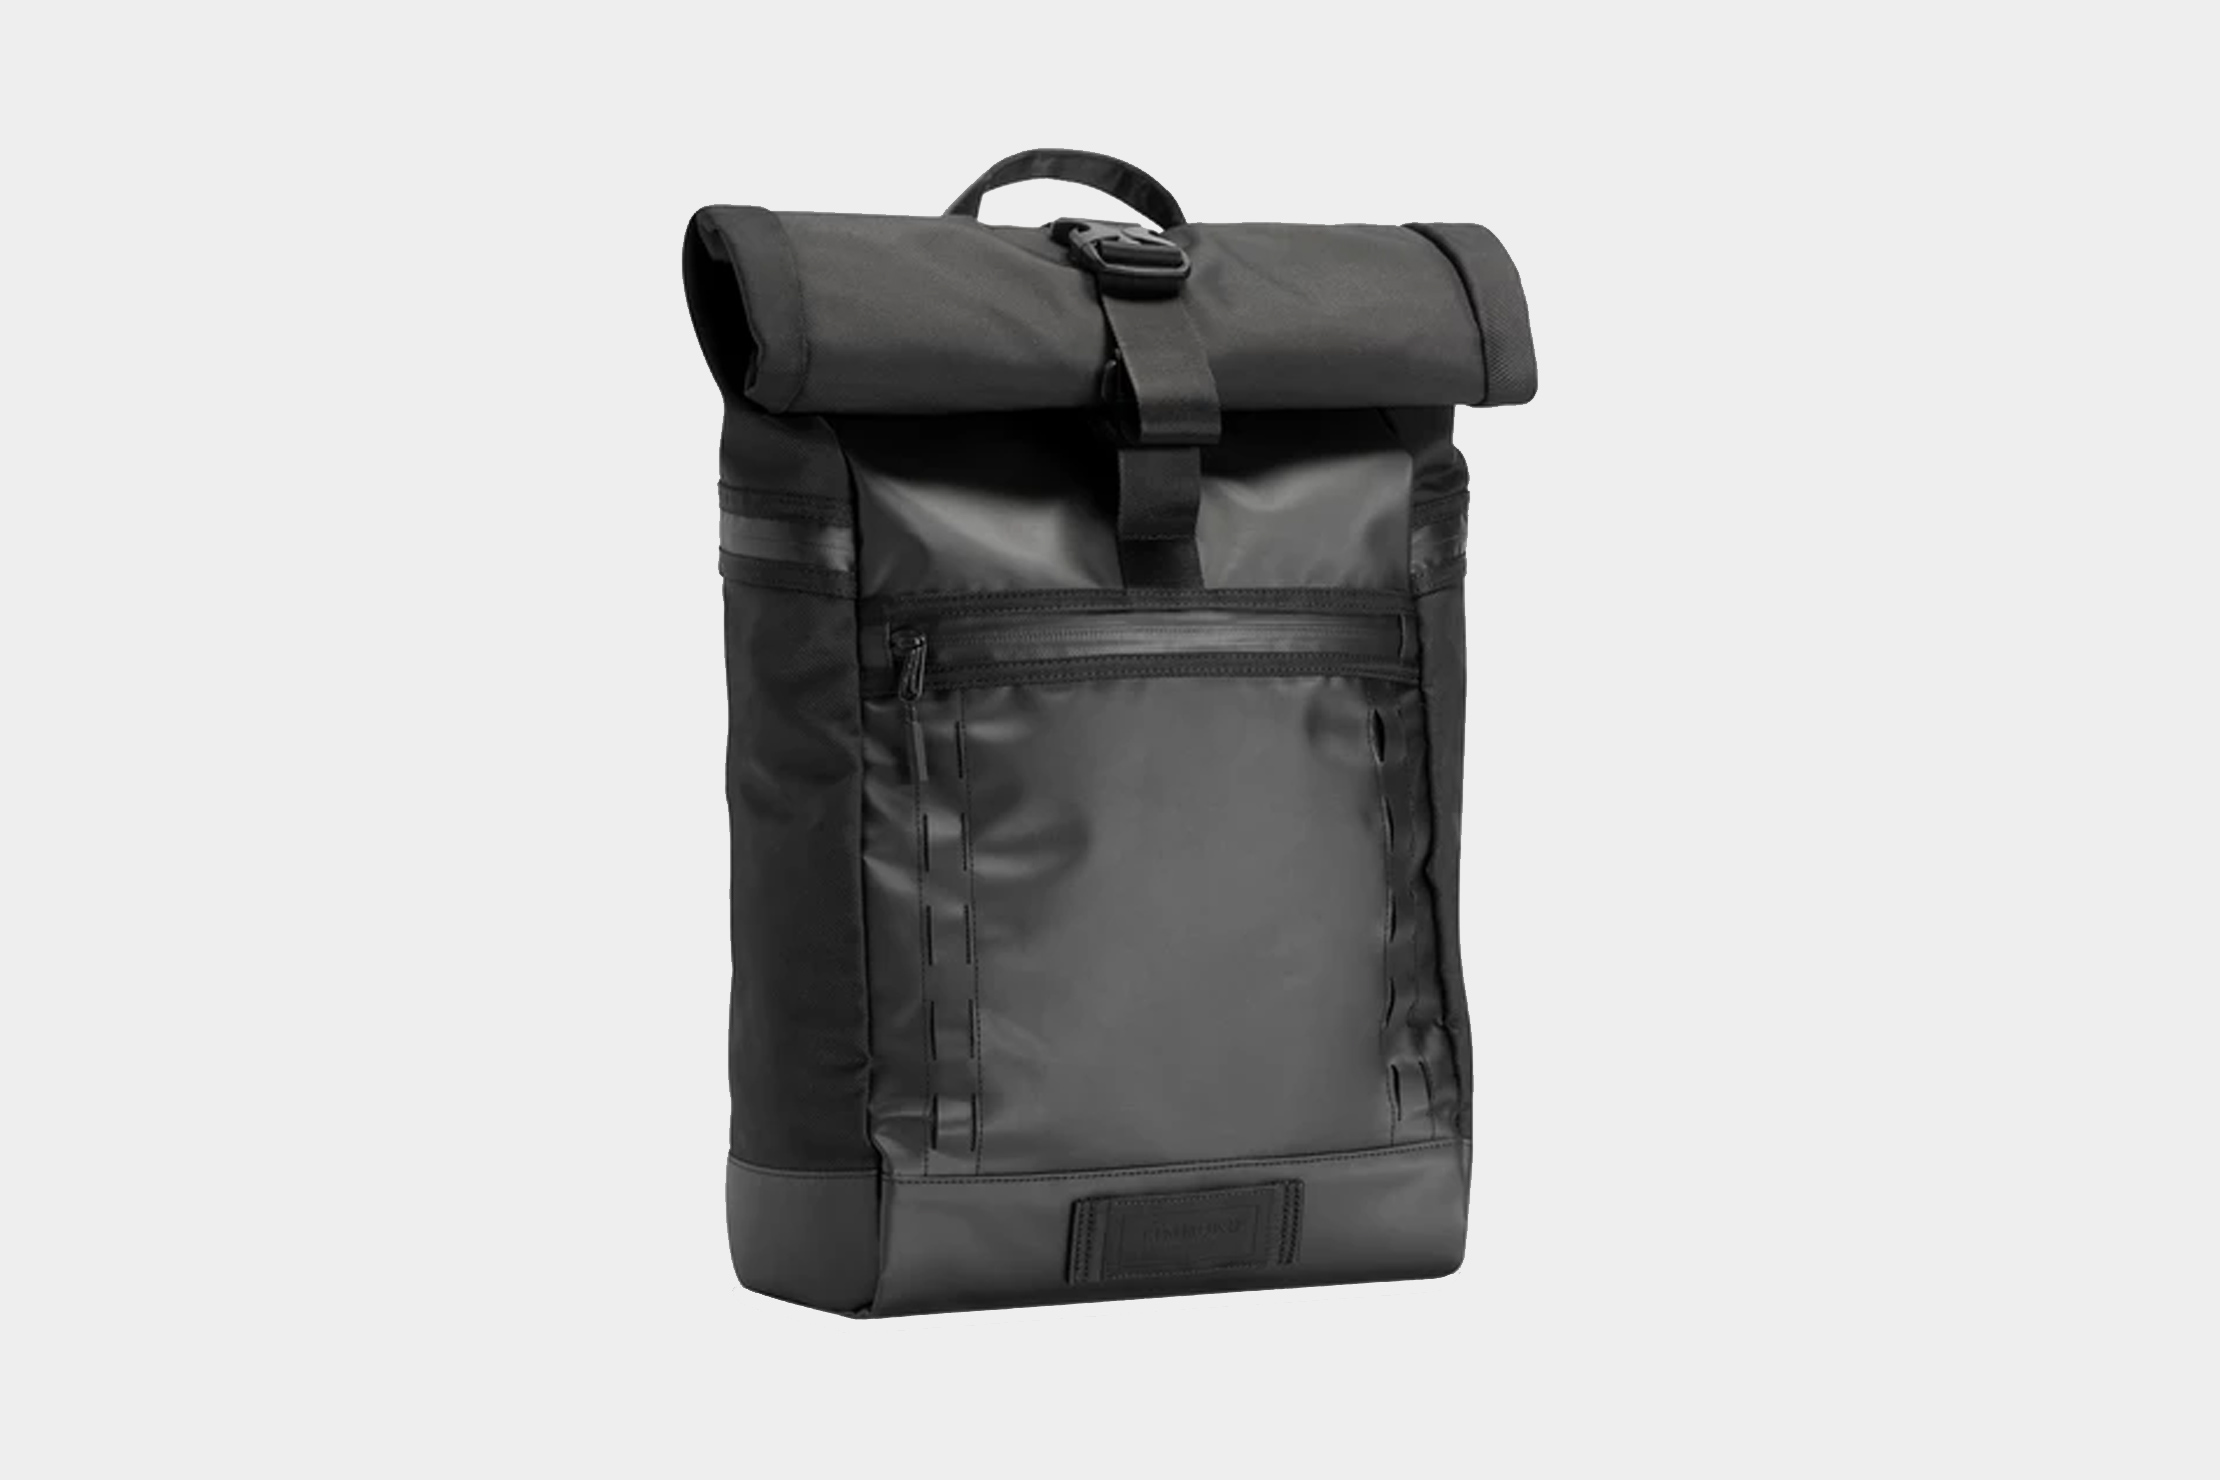 Timbuk2 Tech Roll Top Backpack Review